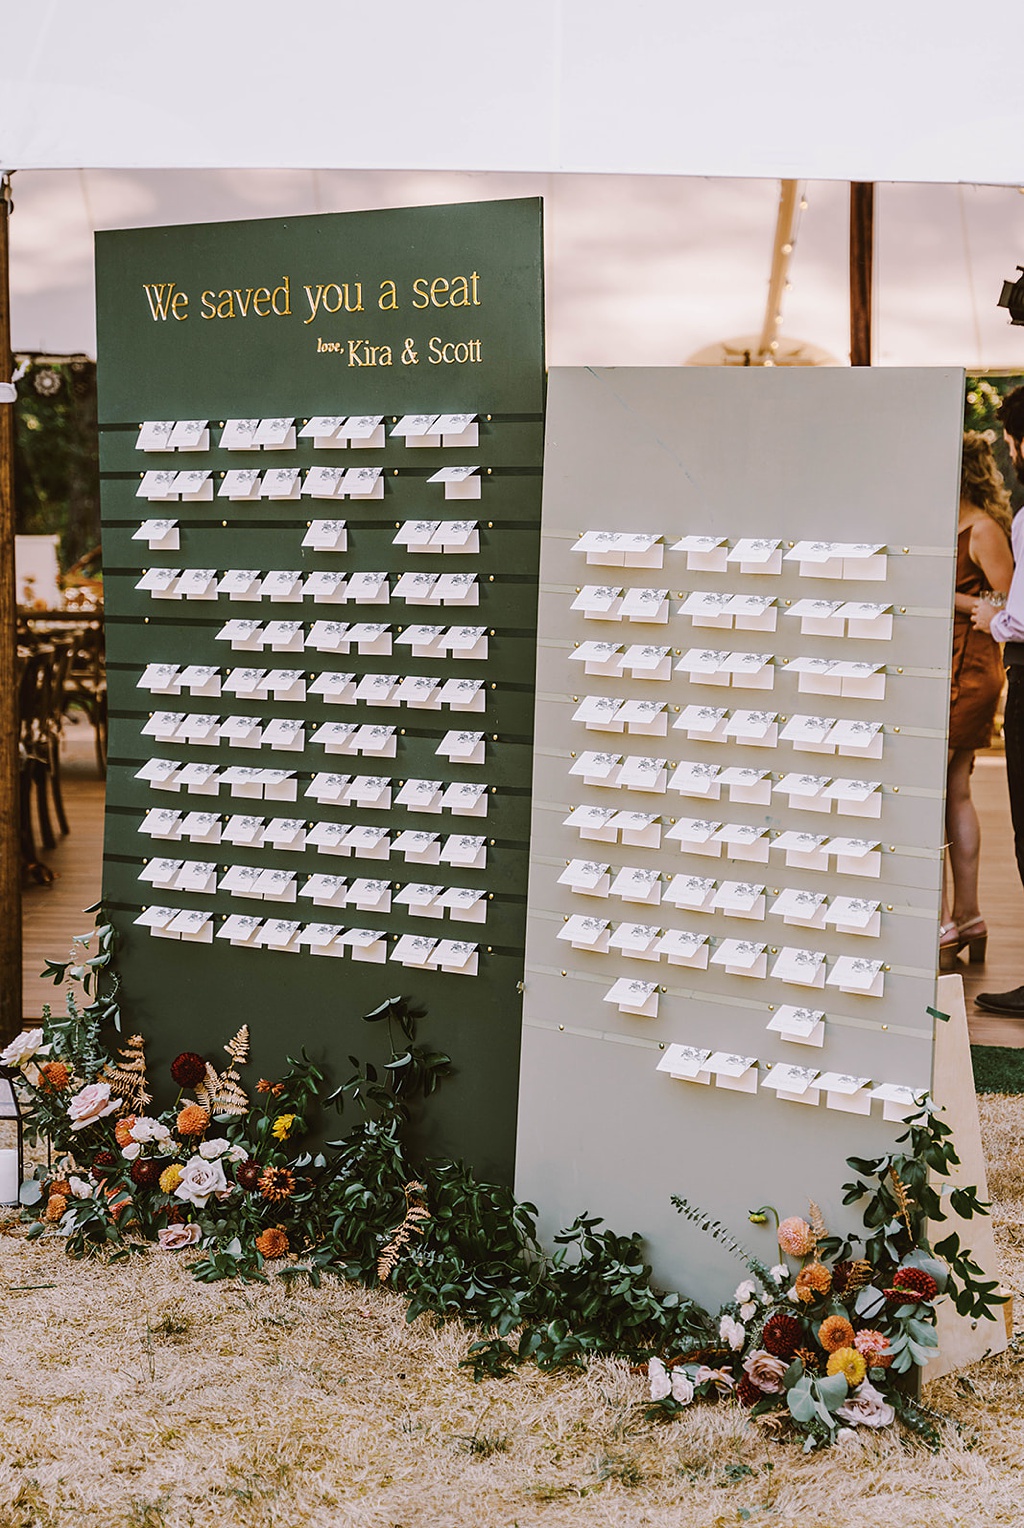 A wedding seating chart with escort cards and a floral installation